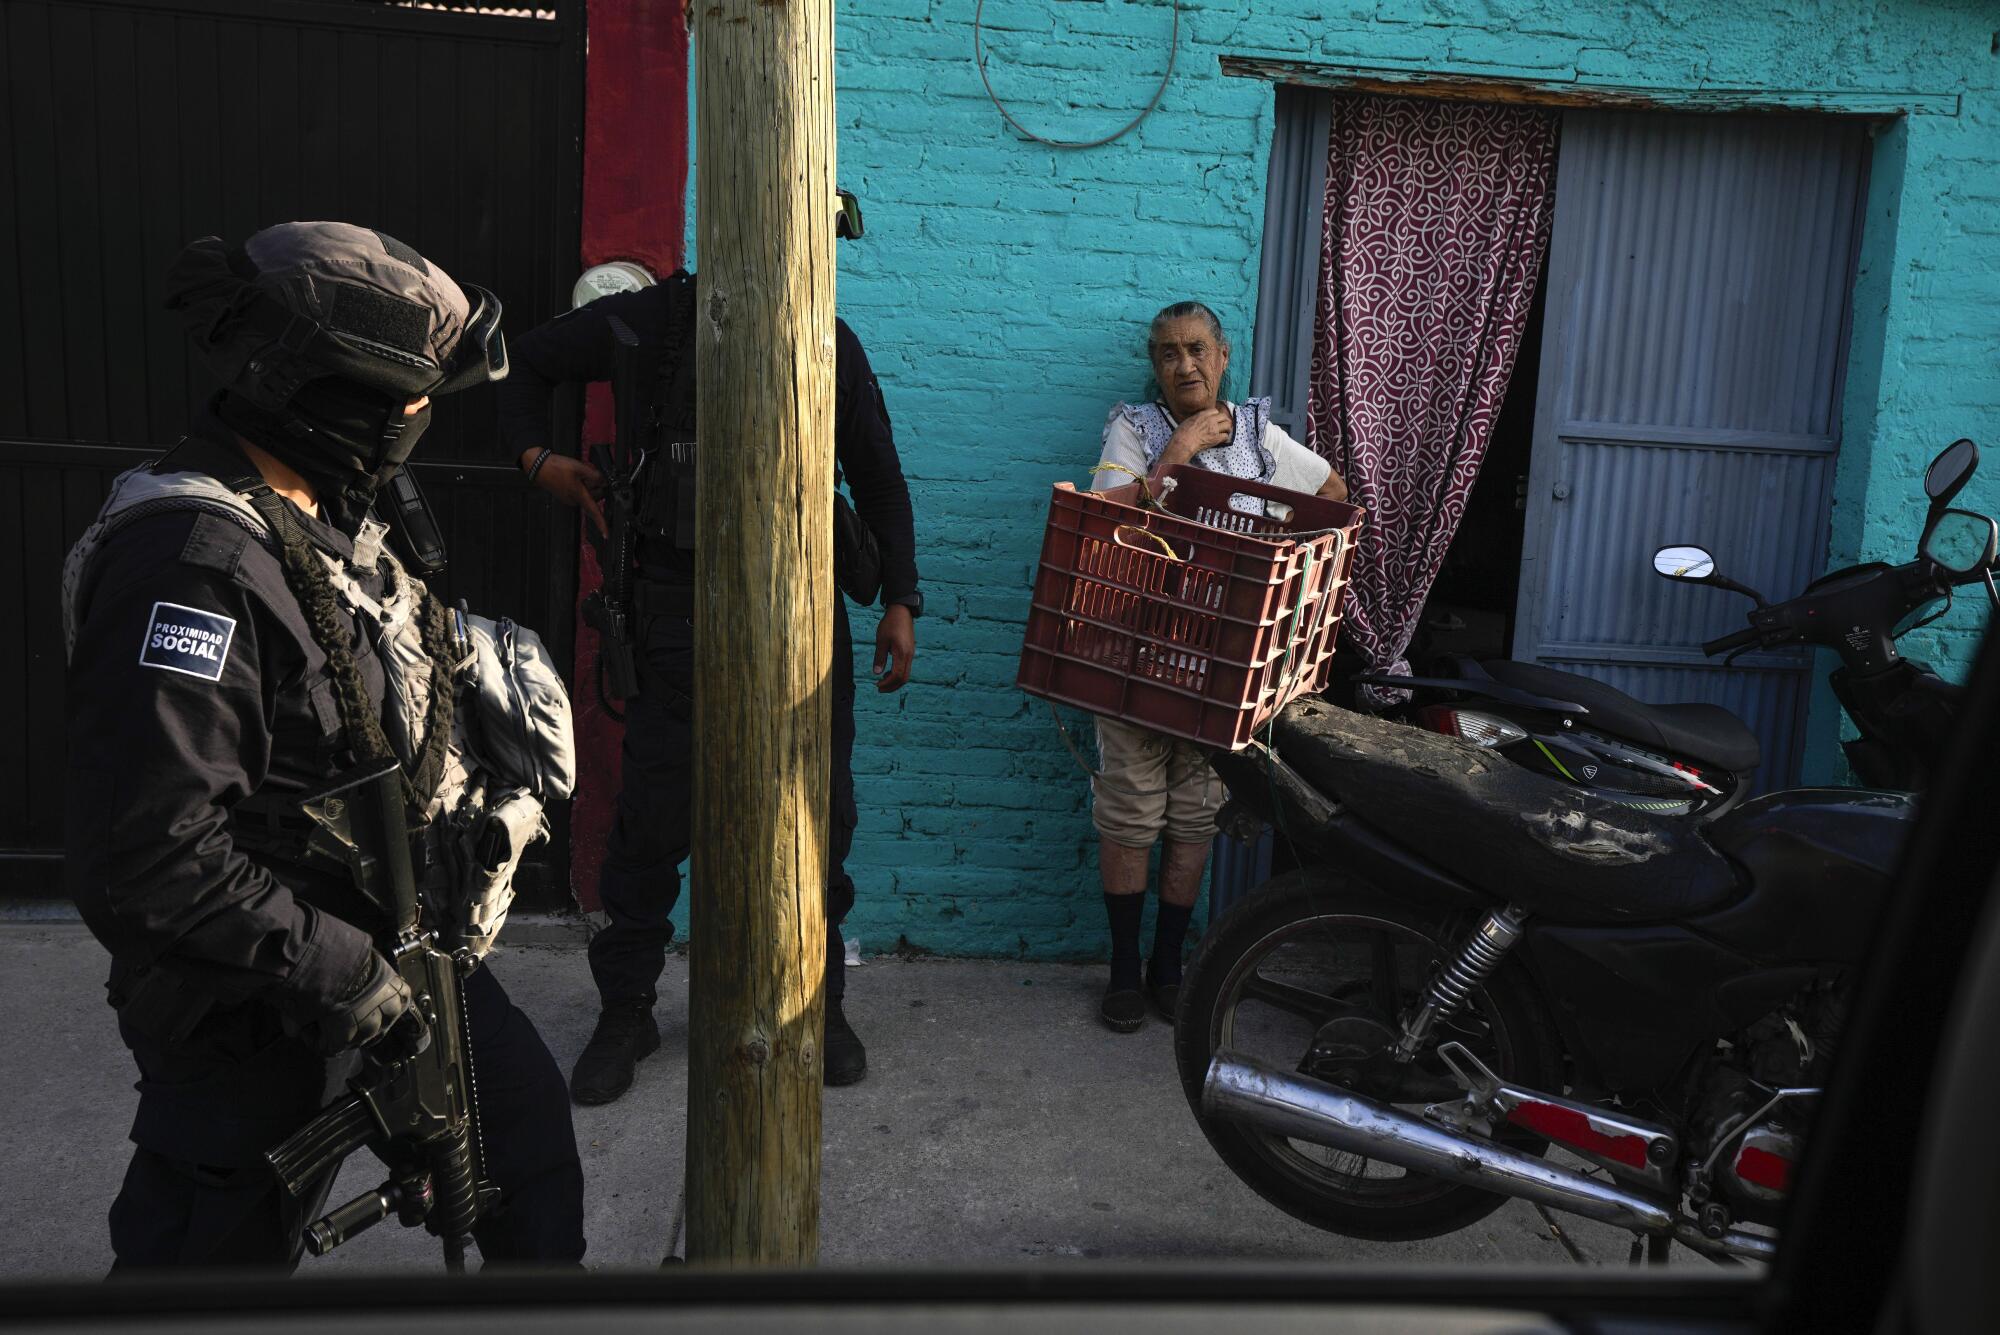 Municipal police chat with a resident while patrolling her neighborhood in Celaya, Mexico.